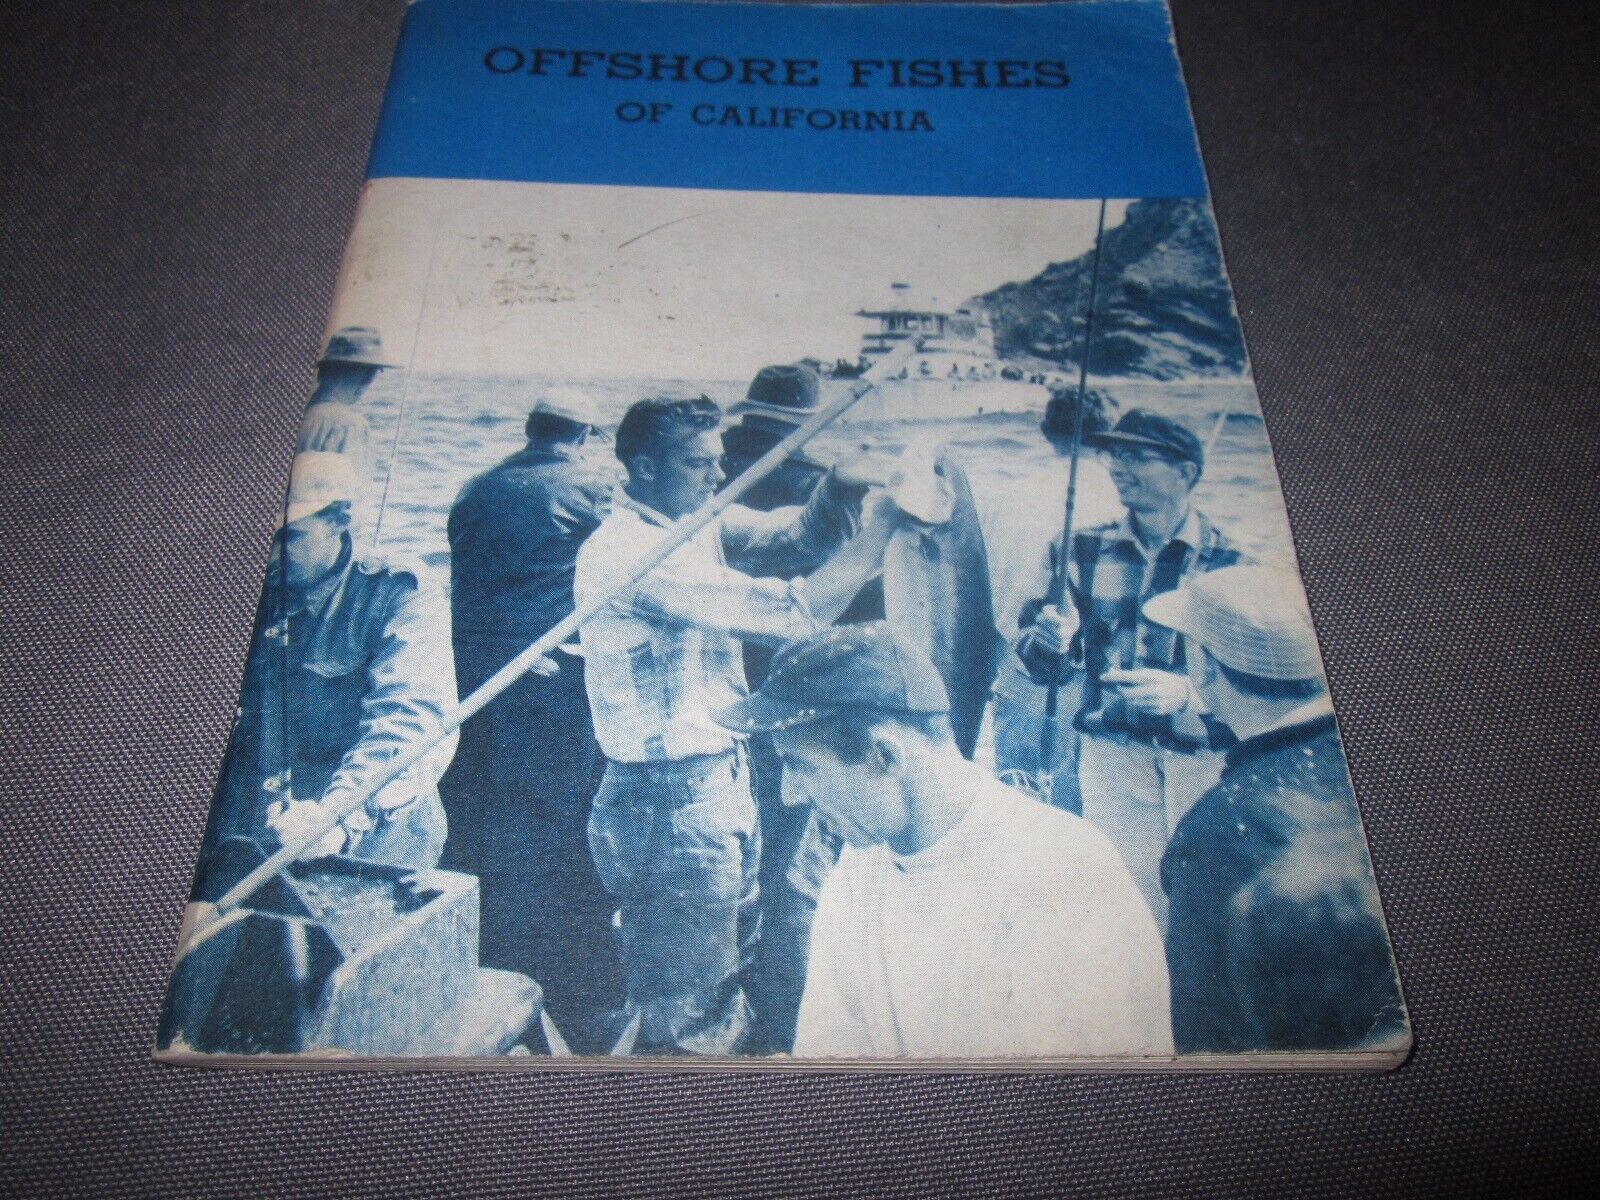 Vintage 1969 OFFSHORE FISHES OF CALIFORNIA California Department Of Fish & Game